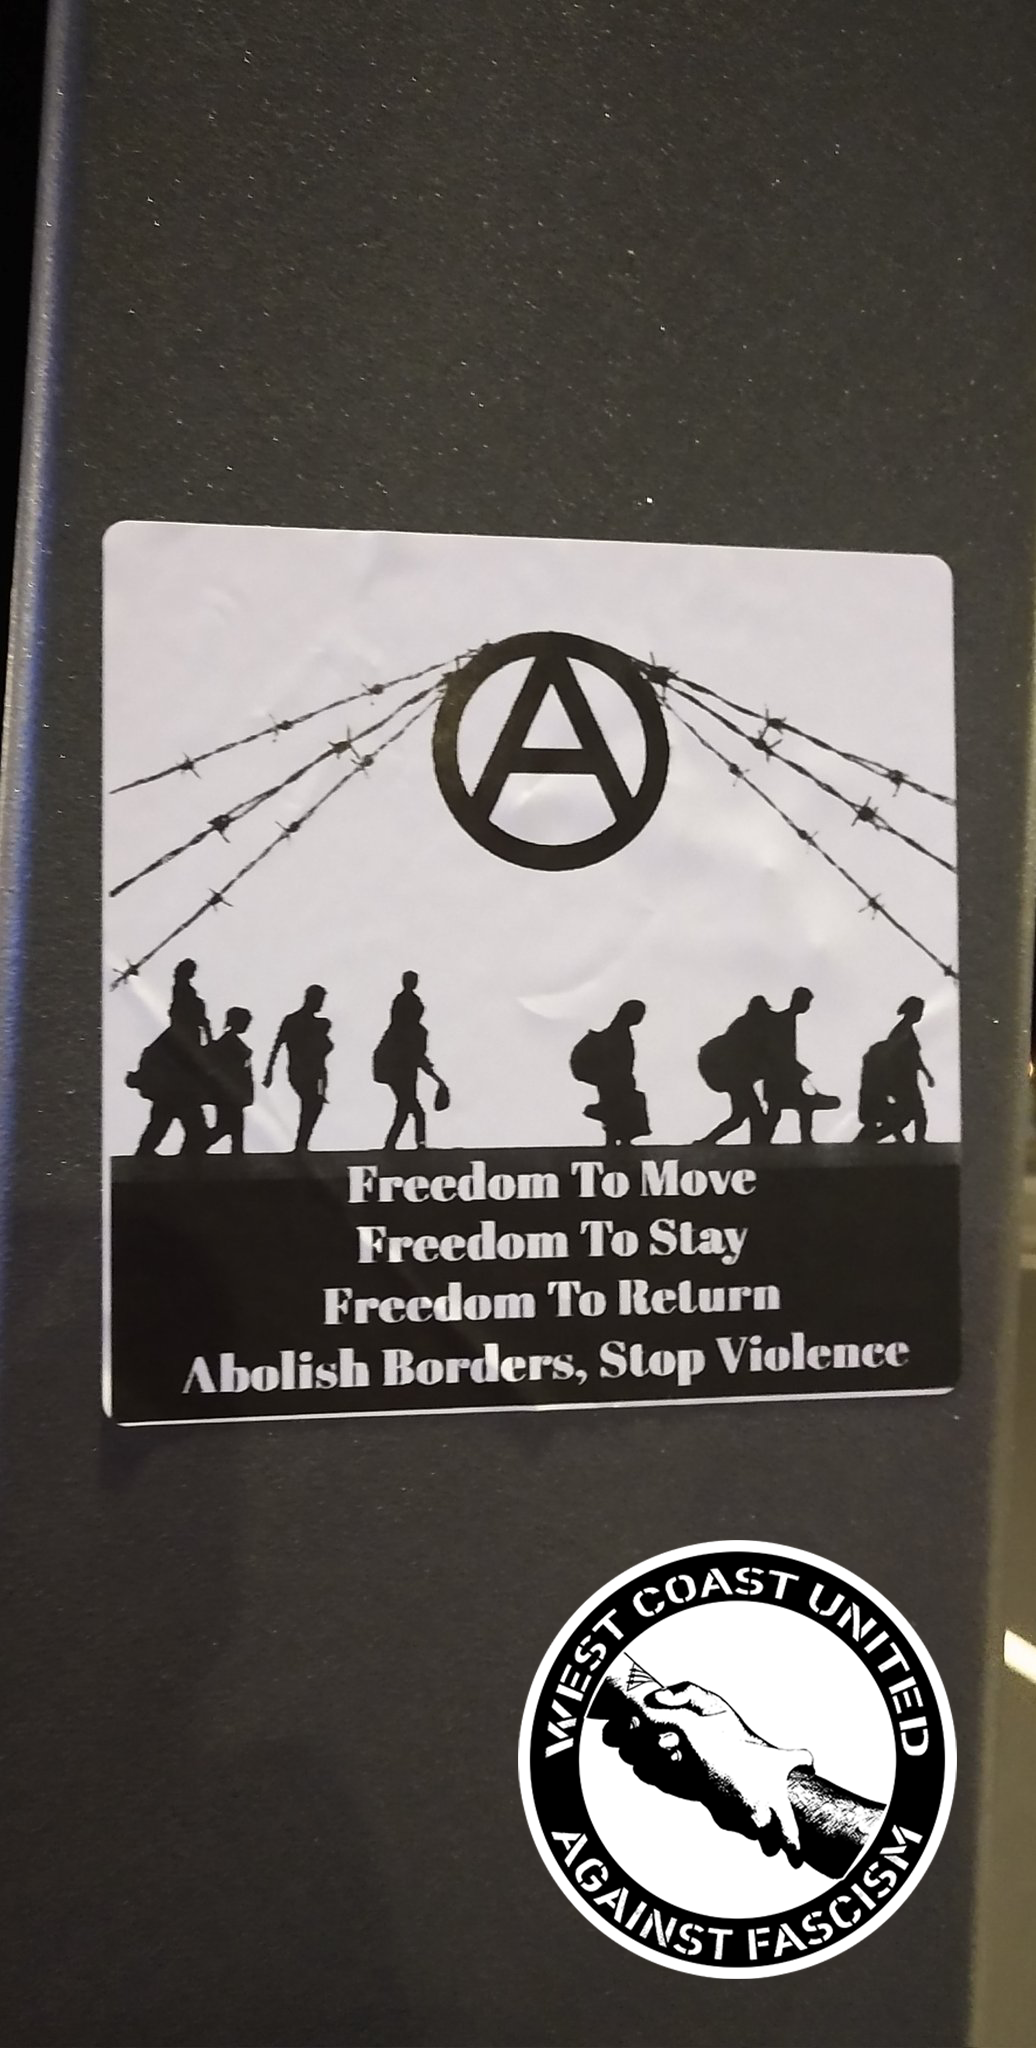 A square sticker is adheared to a metal post. There is a horizon line between black and white where people carrying bags and children are walking from left to right. There is barbed wire going across that is being lifted up by the symol of a "circle a", the common symbol for anarchism. Below the people crossing the barbed wire reads "Freedom to move, Freedom to Stay, Freedom to Return. Abolish borders, stop violence."